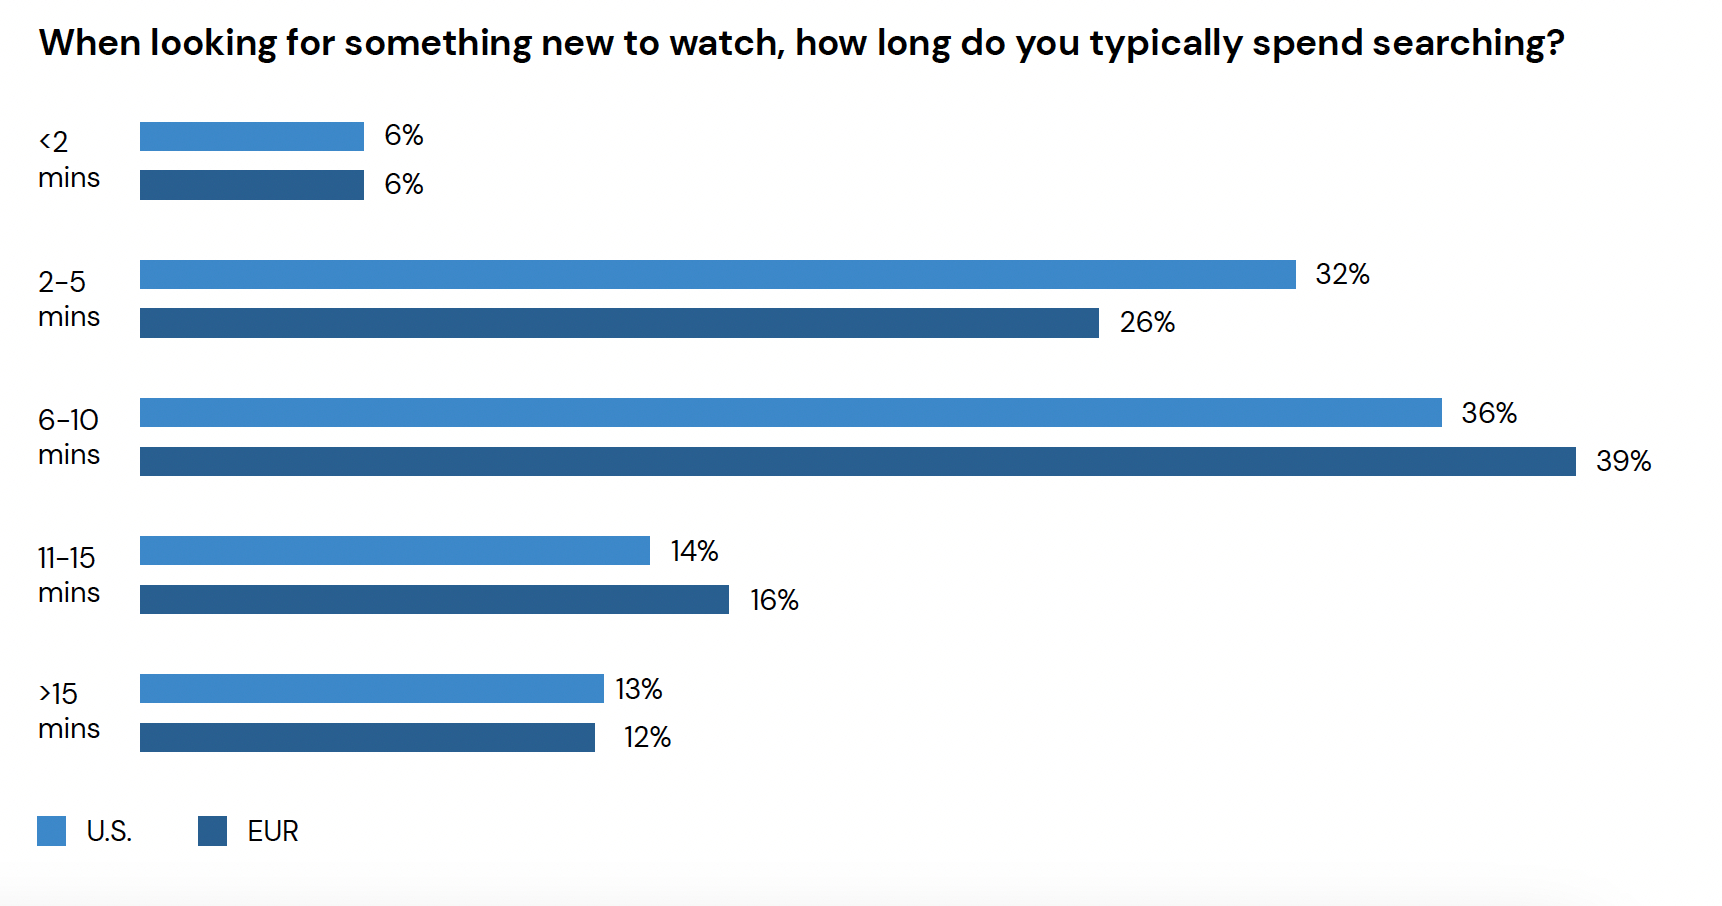 When looking for something new to watch, how long do you typically spend searching? - US, Europe - chart